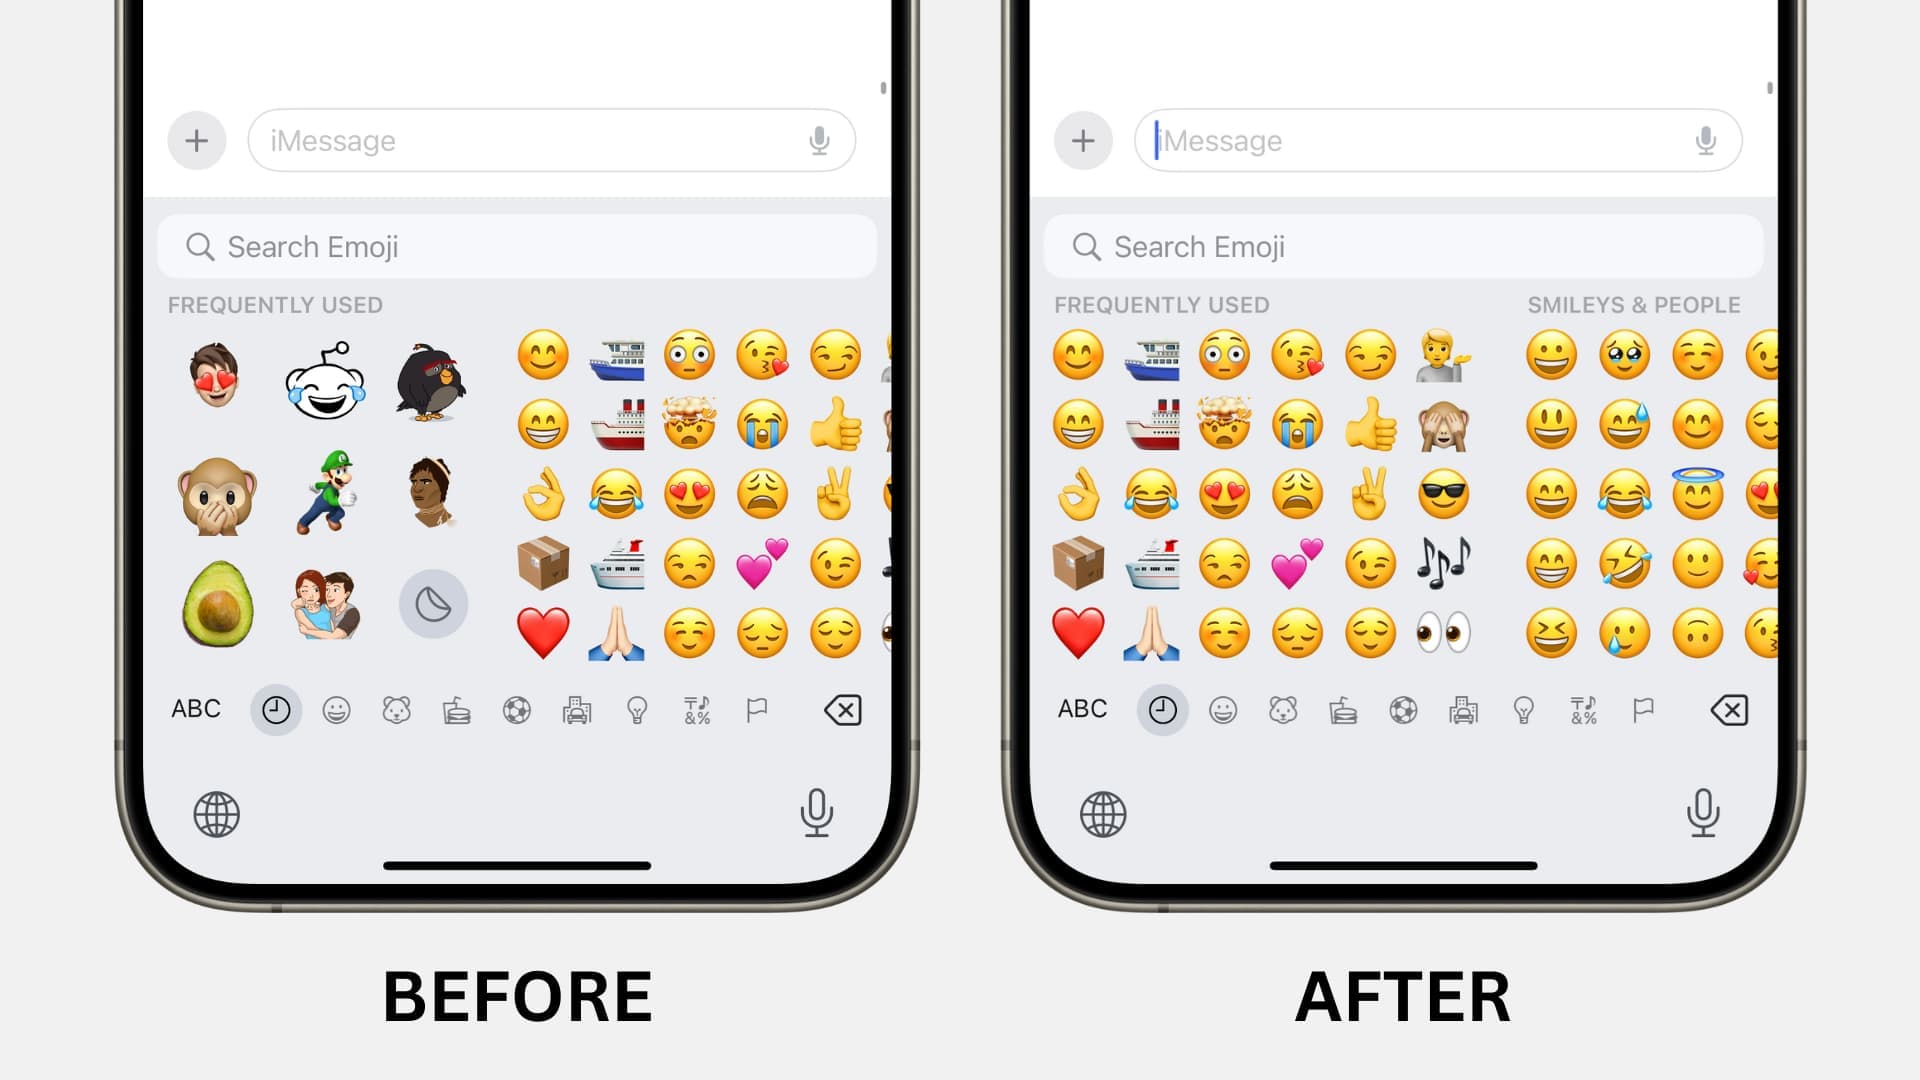 iPhone emoji keyboard with and without stickers